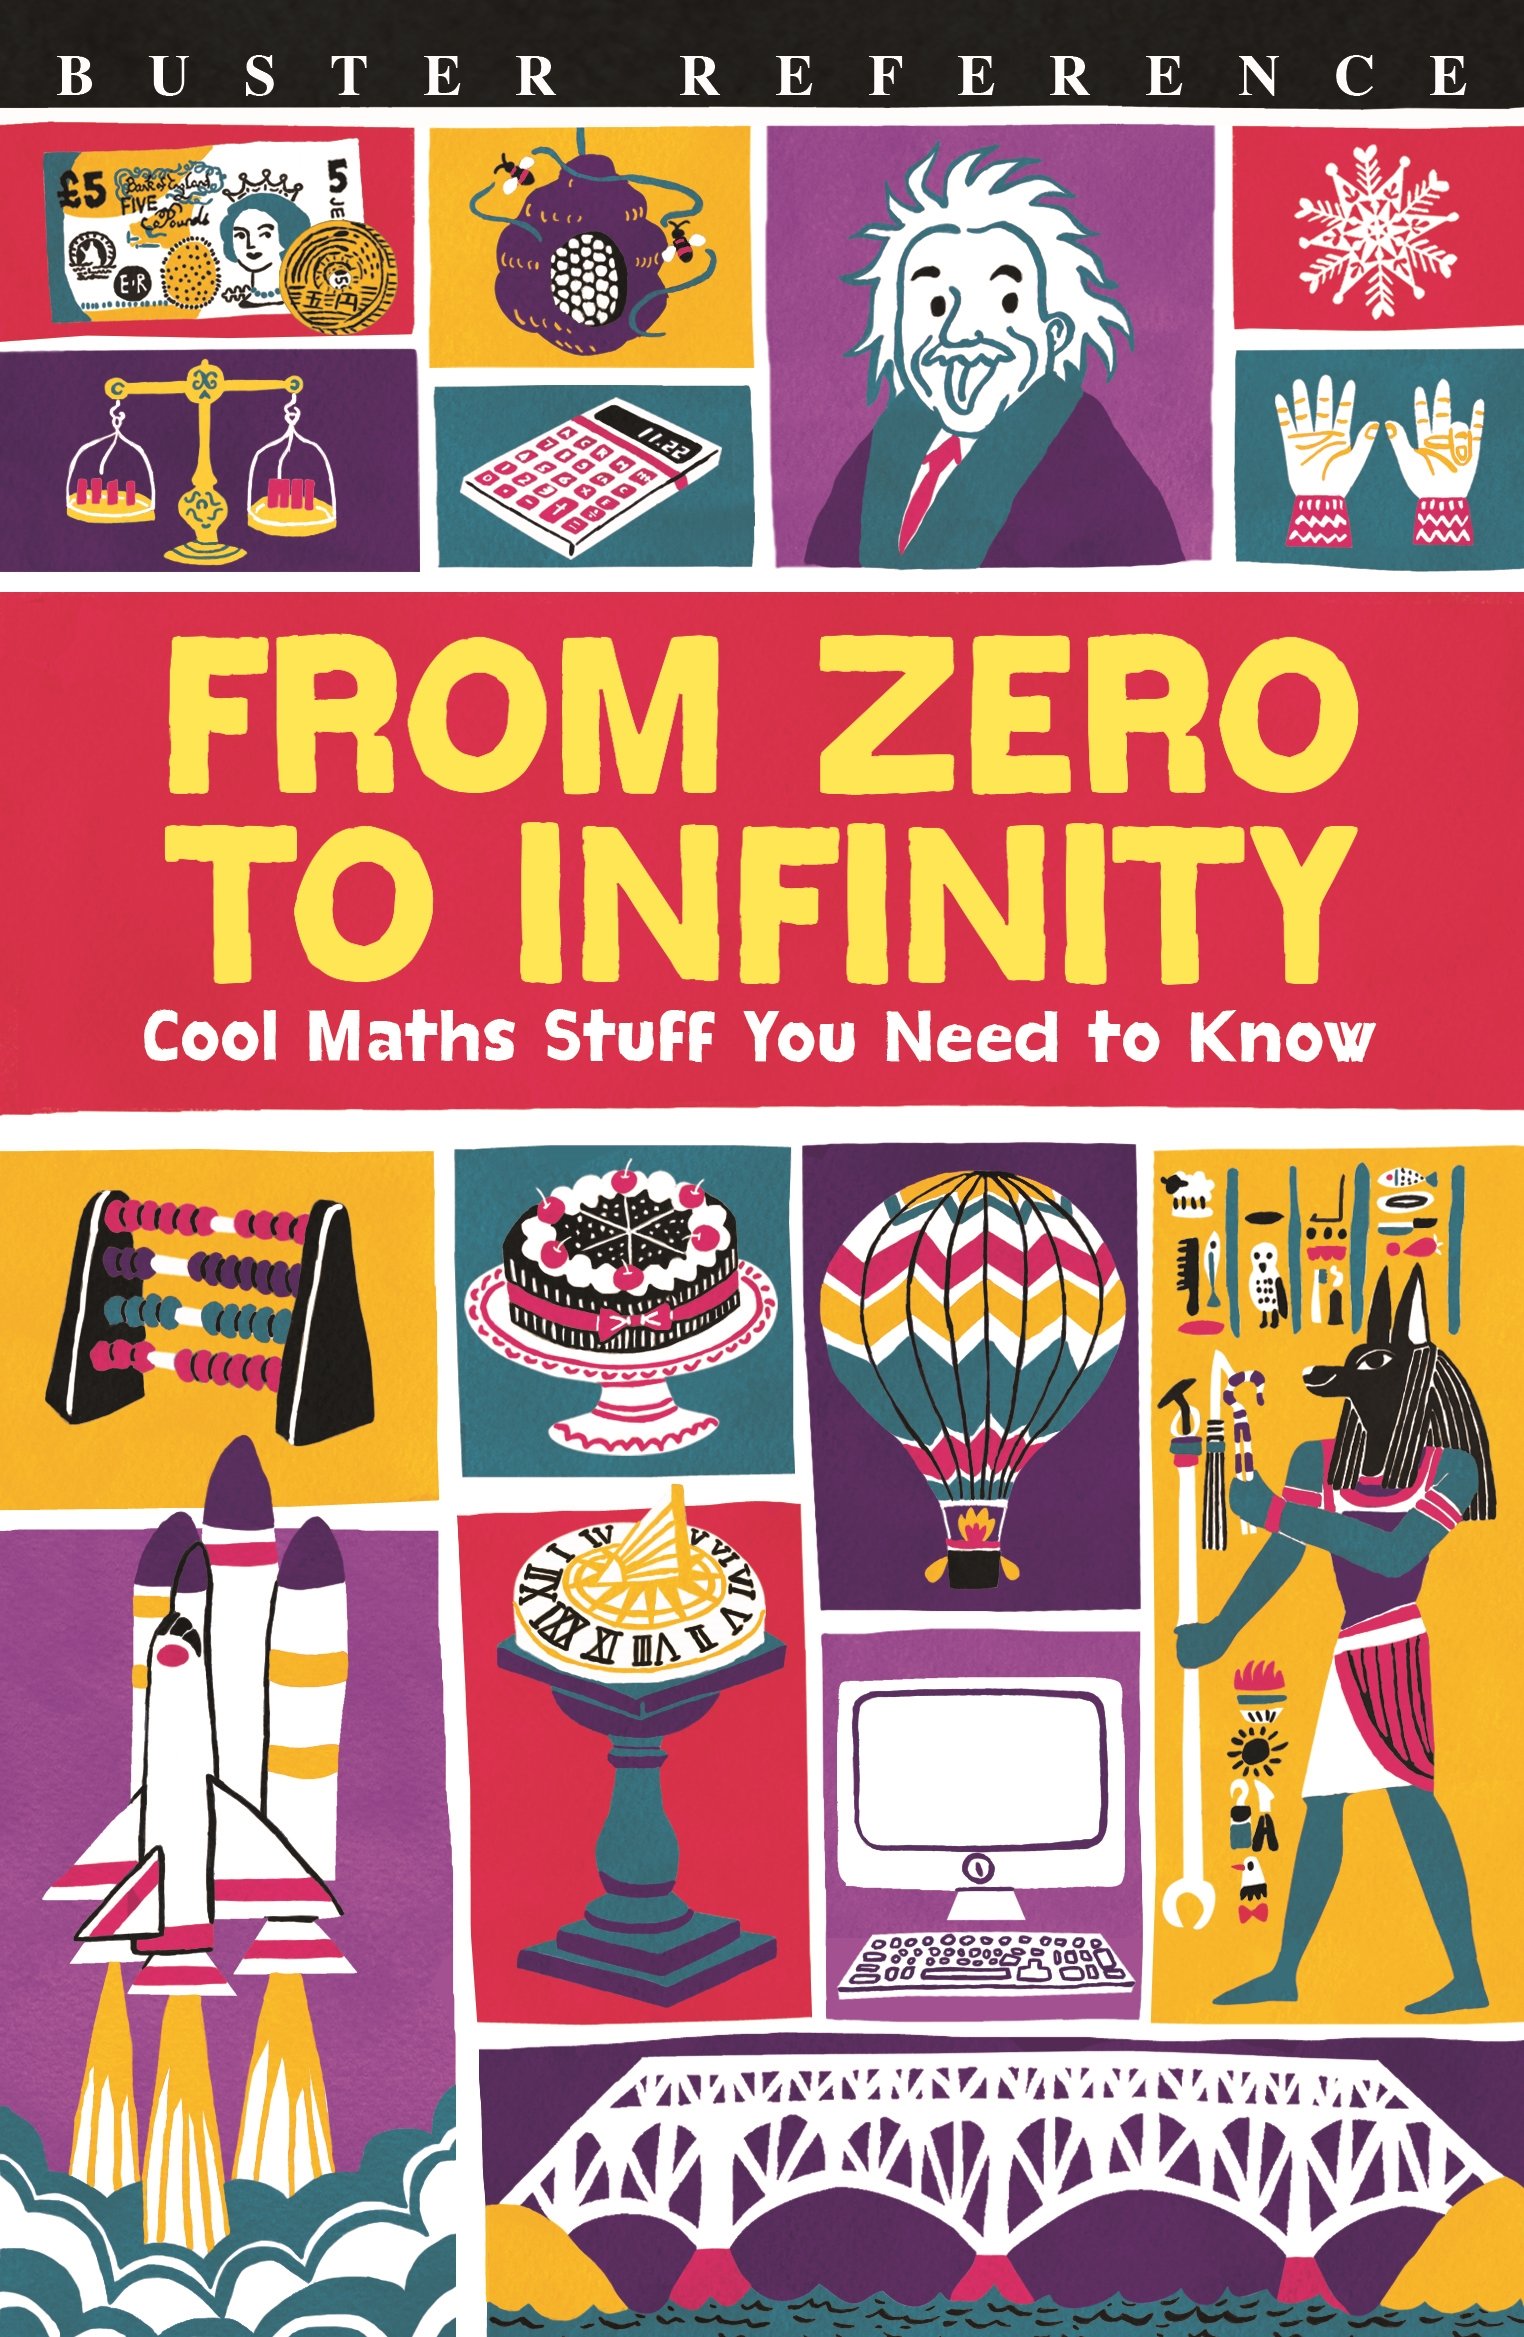 From Zero to Infinity | Dr. Mike Goldsmith